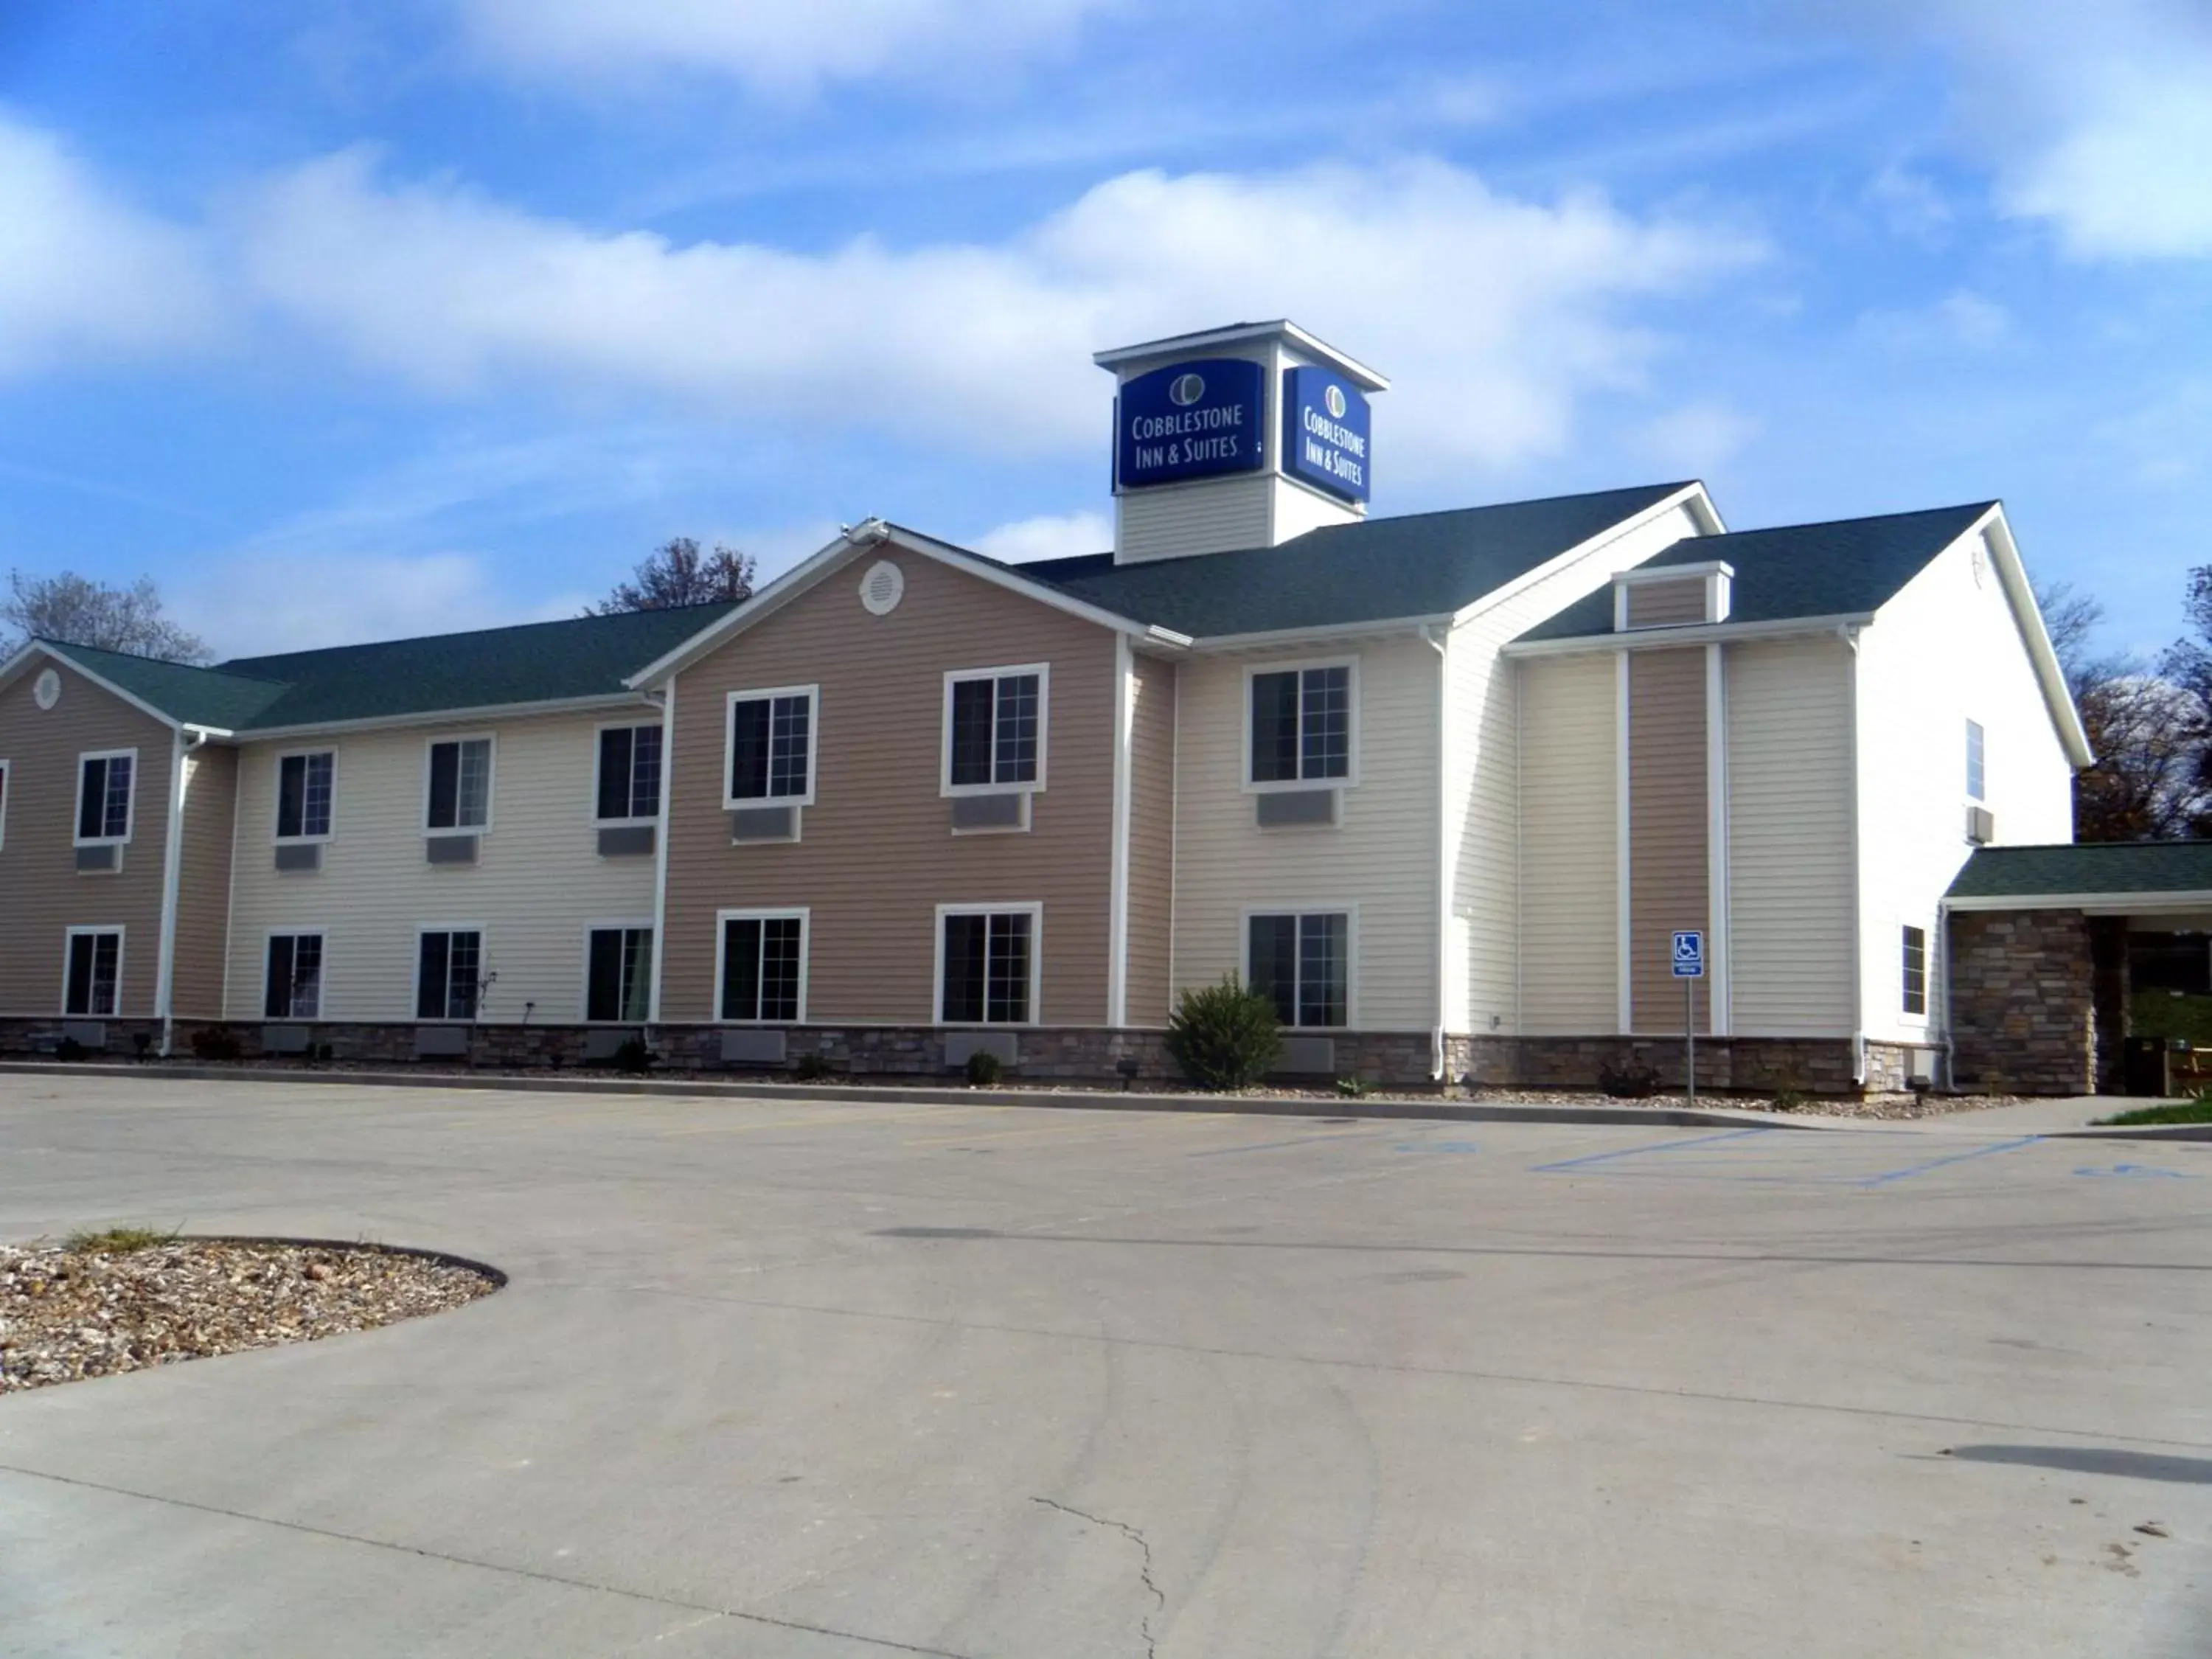 Facade/entrance, Property Building in Cobblestone Inn & Suites - Bloomfield